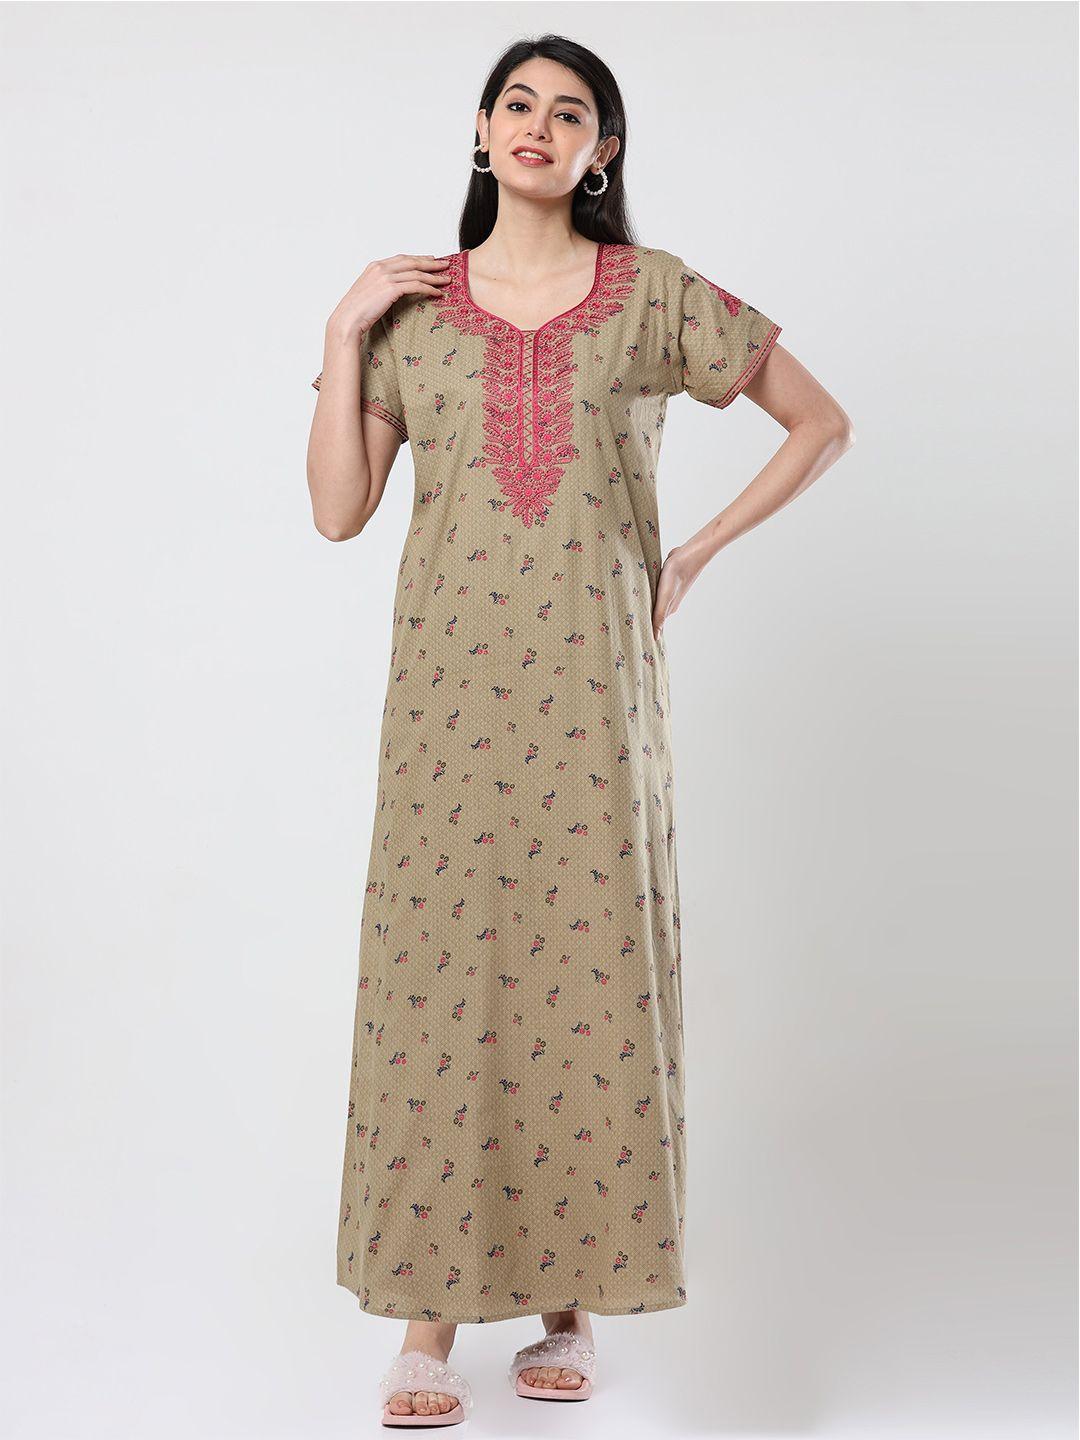 9shines label floral printed pure cotton maxi nightdress